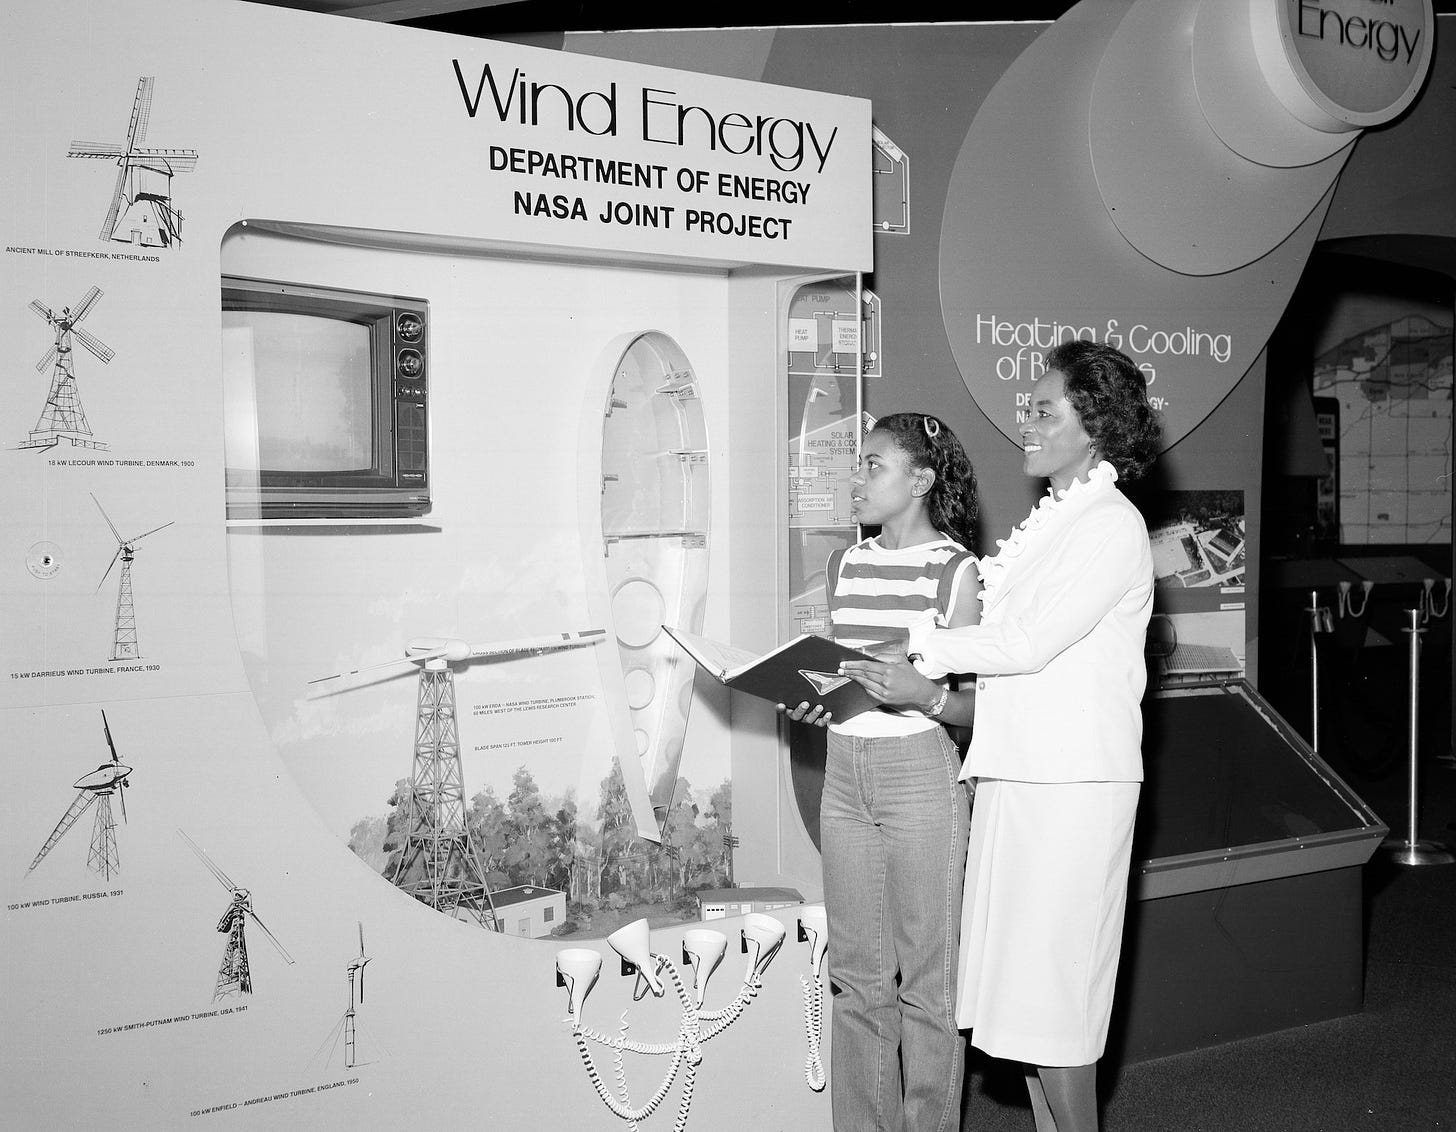 Annie Easley with young black girl in front of a Wind Energy project installation. Photo is black and white.